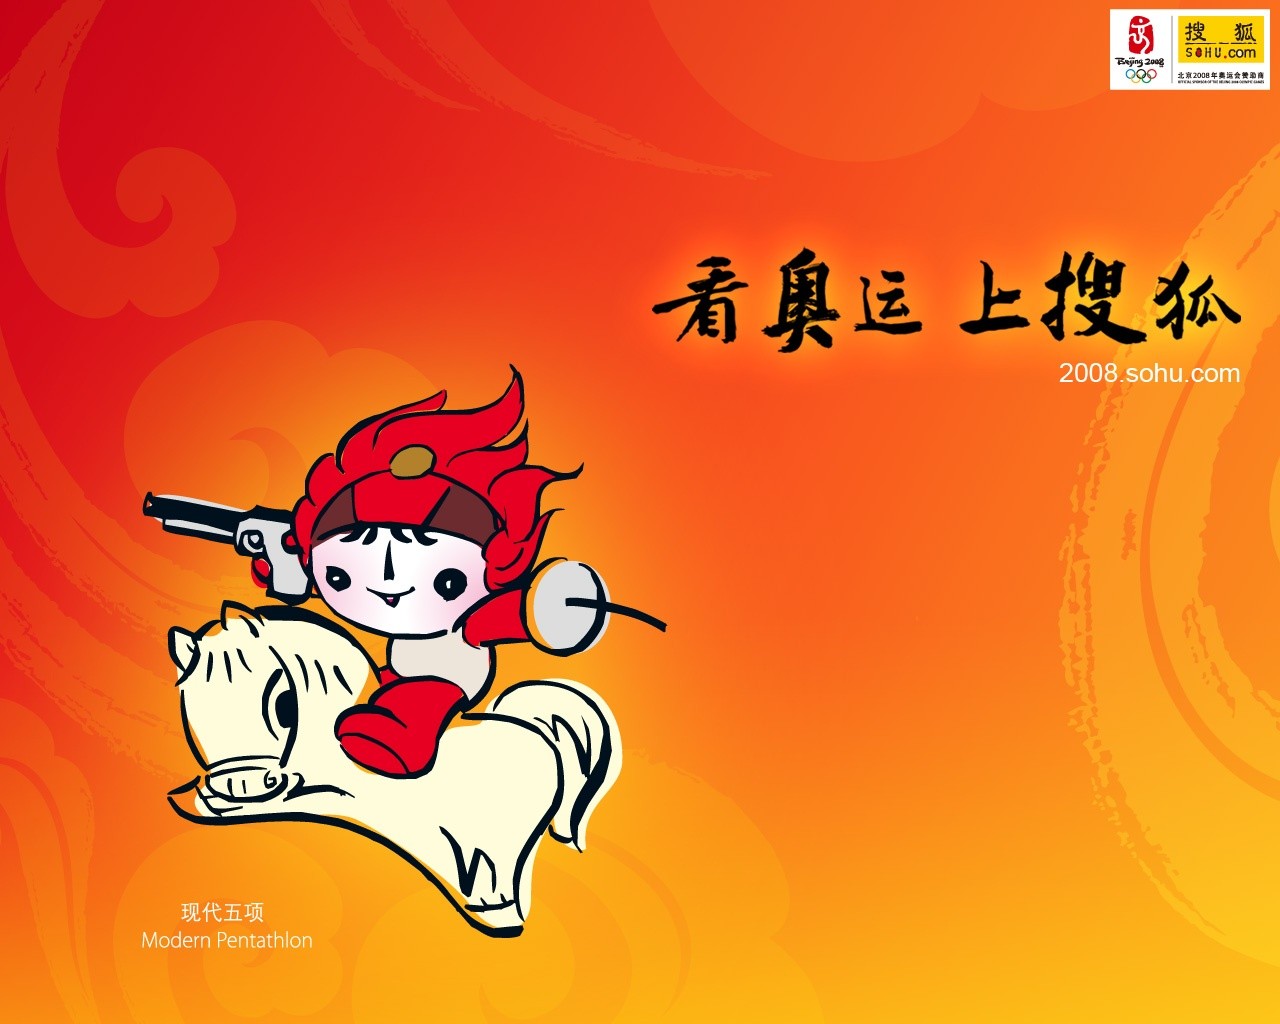 08 Olympic Games Fuwa Wallpapers #34 - 1280x1024